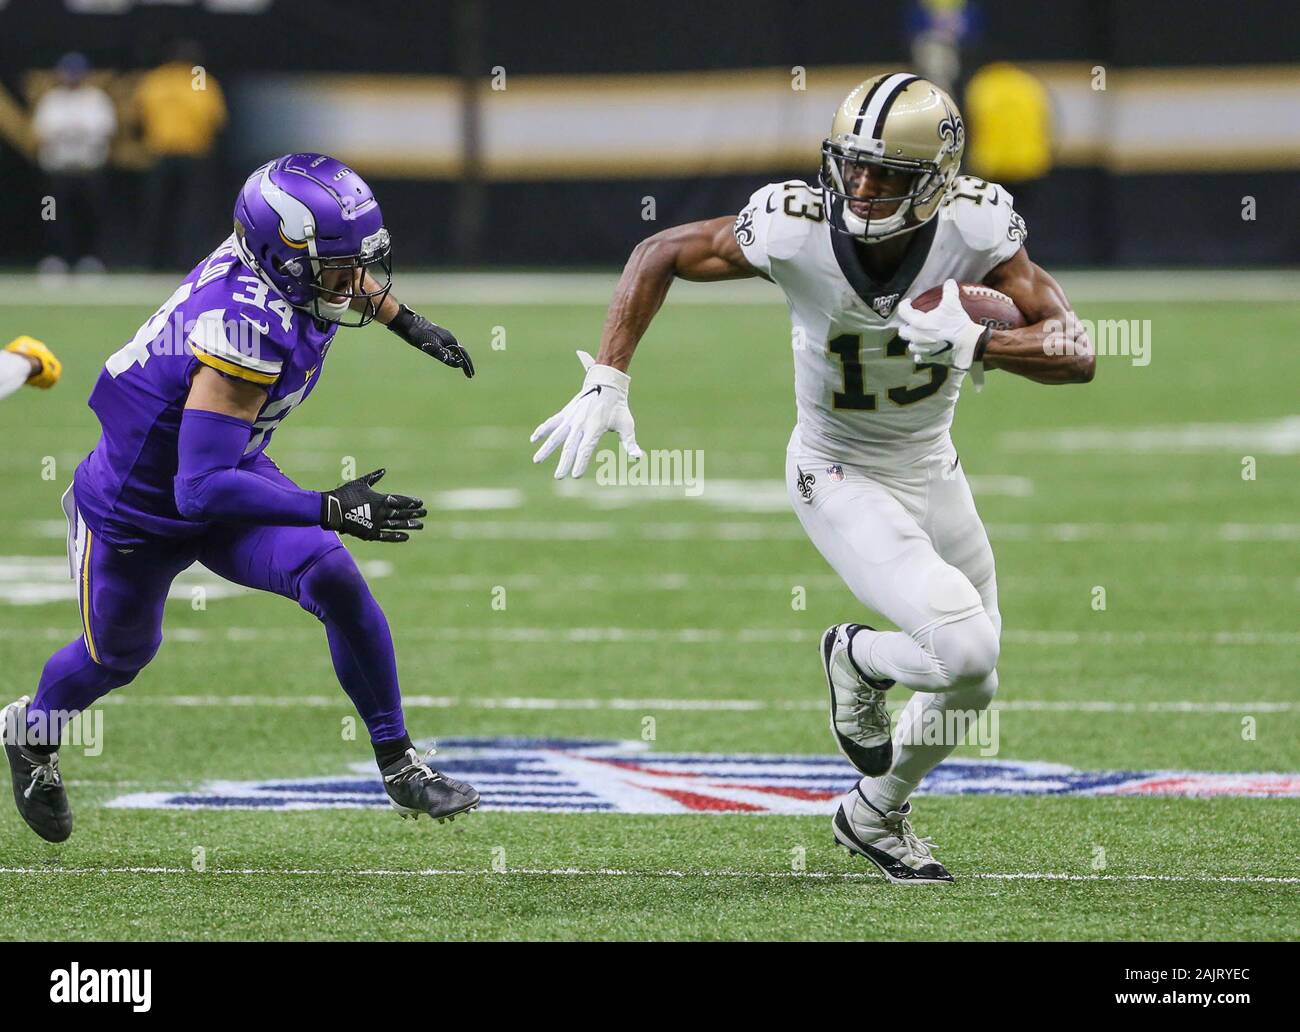 New Orleans, LA, USA. 5th Jan, 2020. New Orleans Saints wide receiver Michael Thomas (13) tries to outrun Minnesota Vikings defensive back Andrew Sendejo (34) during NFL Wild Card Playoff action between the New Orleans Saints and the Minnesota Vikings at the Mercedes Benz Superdome in New Orleans, LA. Jonathan Mailhes/CSM/Alamy Live News Stock Photo